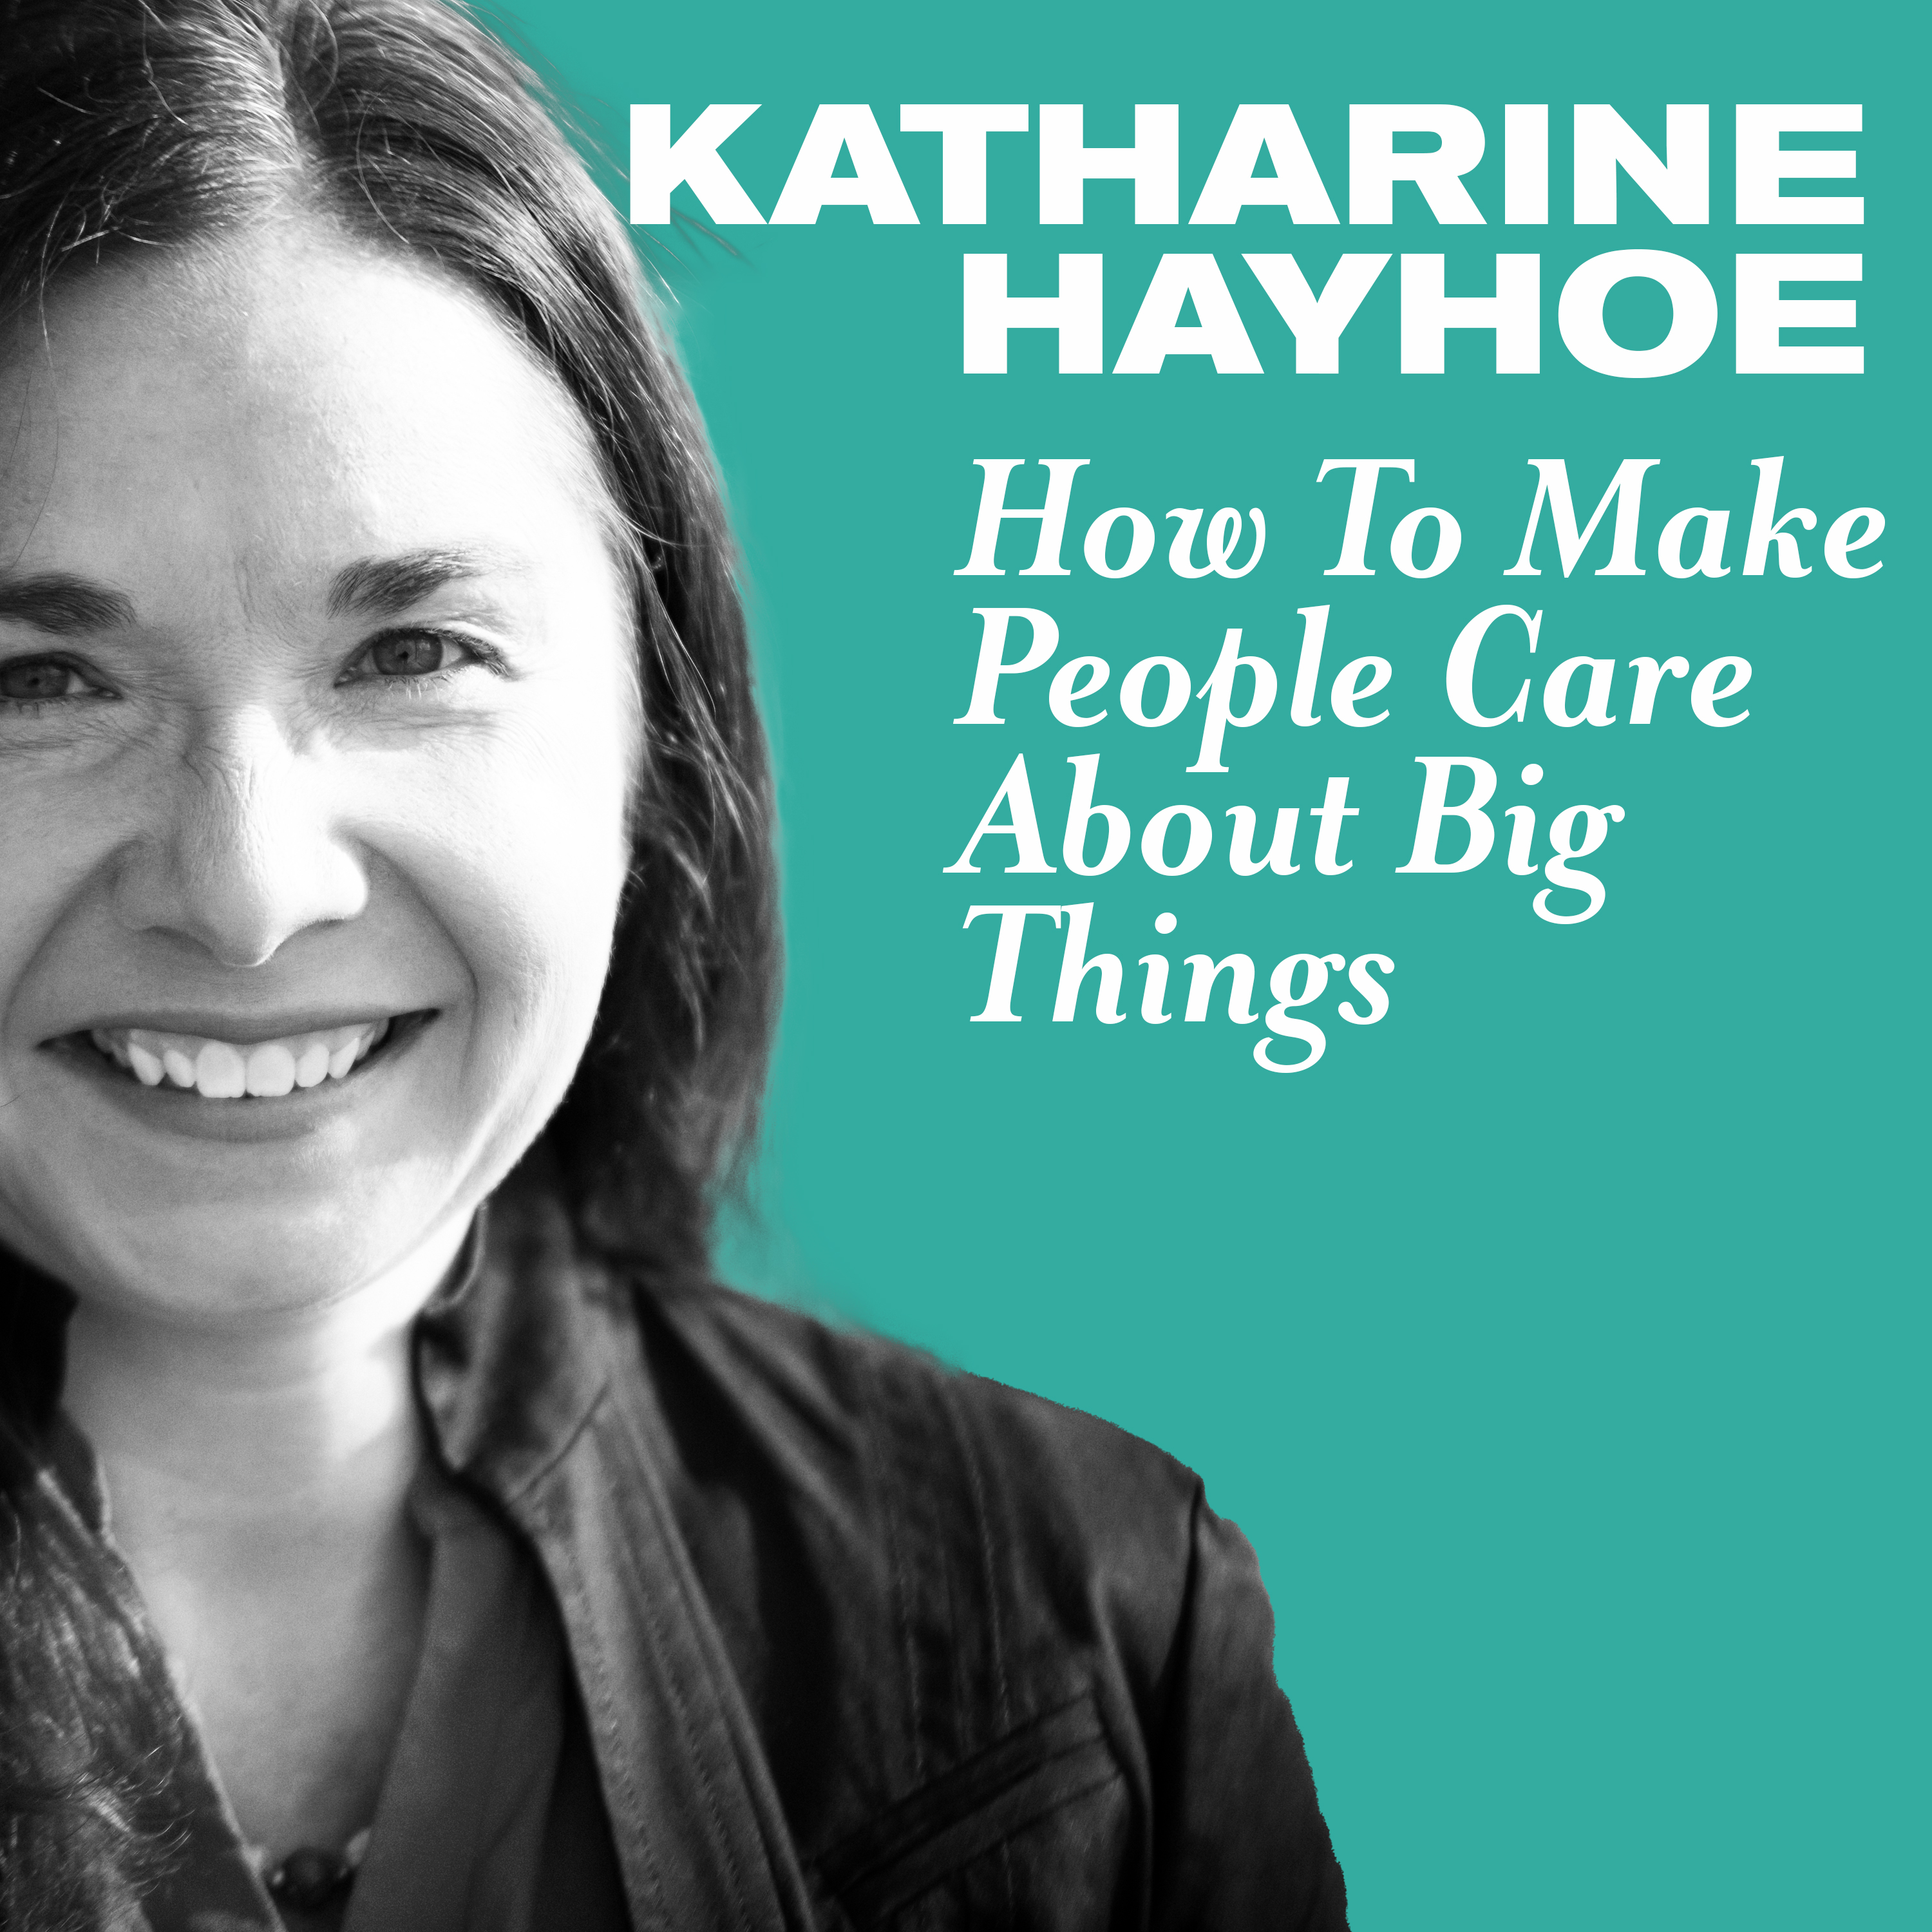 How to Make People Care About Big Things